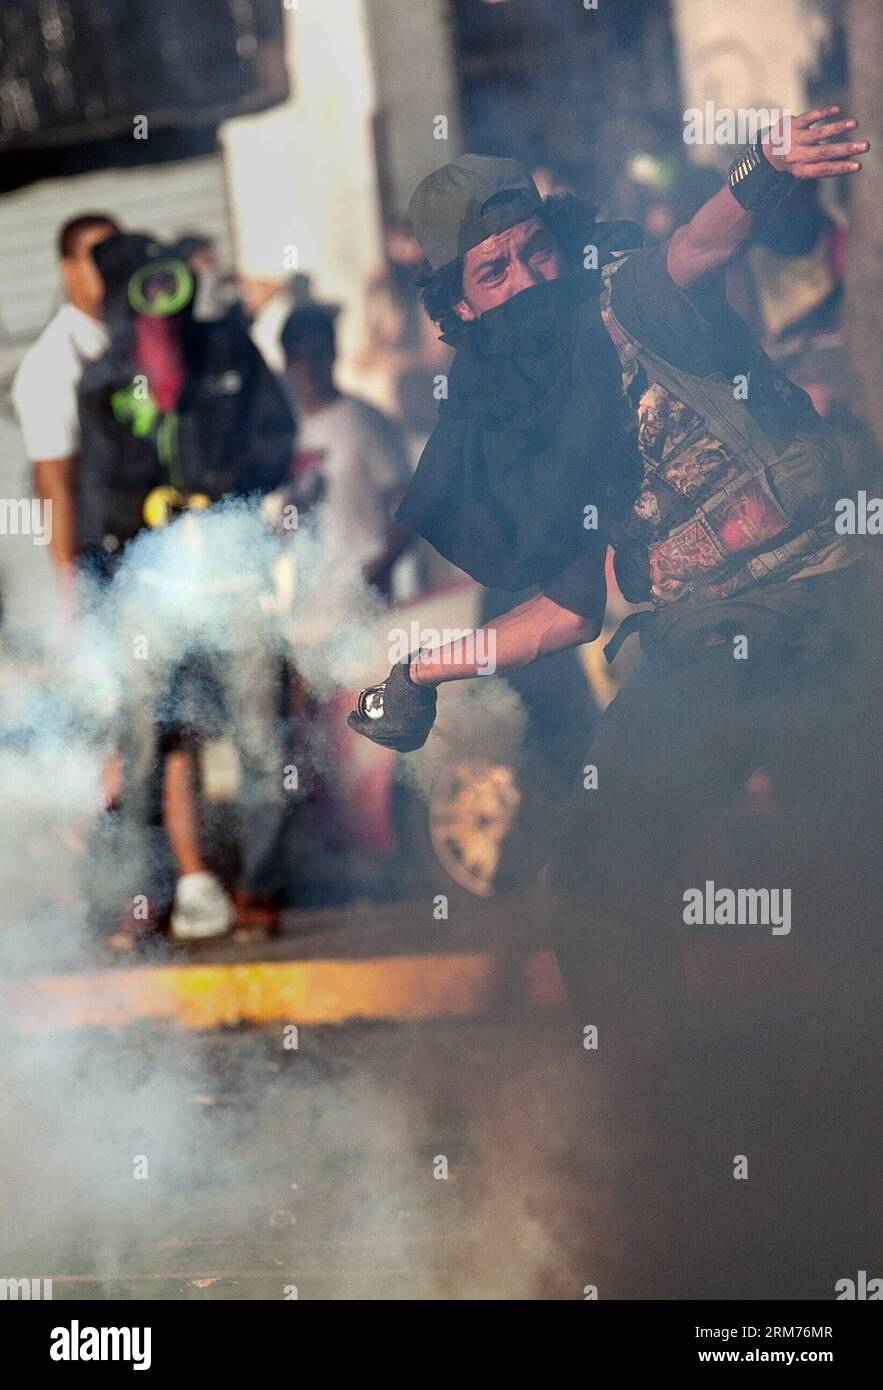 Students and riot police clash during a protest by government opponents, in the city of Caracas, capital of Venezuela, on Feb. 15, 2014. (Xinhua/Boris Vergara) (bxq) VENEZUELA-CARACAS-SOCIETY-PROTEST PUBLICATIONxNOTxINxCHN   Students and Riot Police Clash during a Protest by Government opponents in The City of Caracas Capital of Venezuela ON Feb 15 2014 XINHUA Boris Vergara  Venezuela Caracas Society Protest PUBLICATIONxNOTxINxCHN Stock Photo